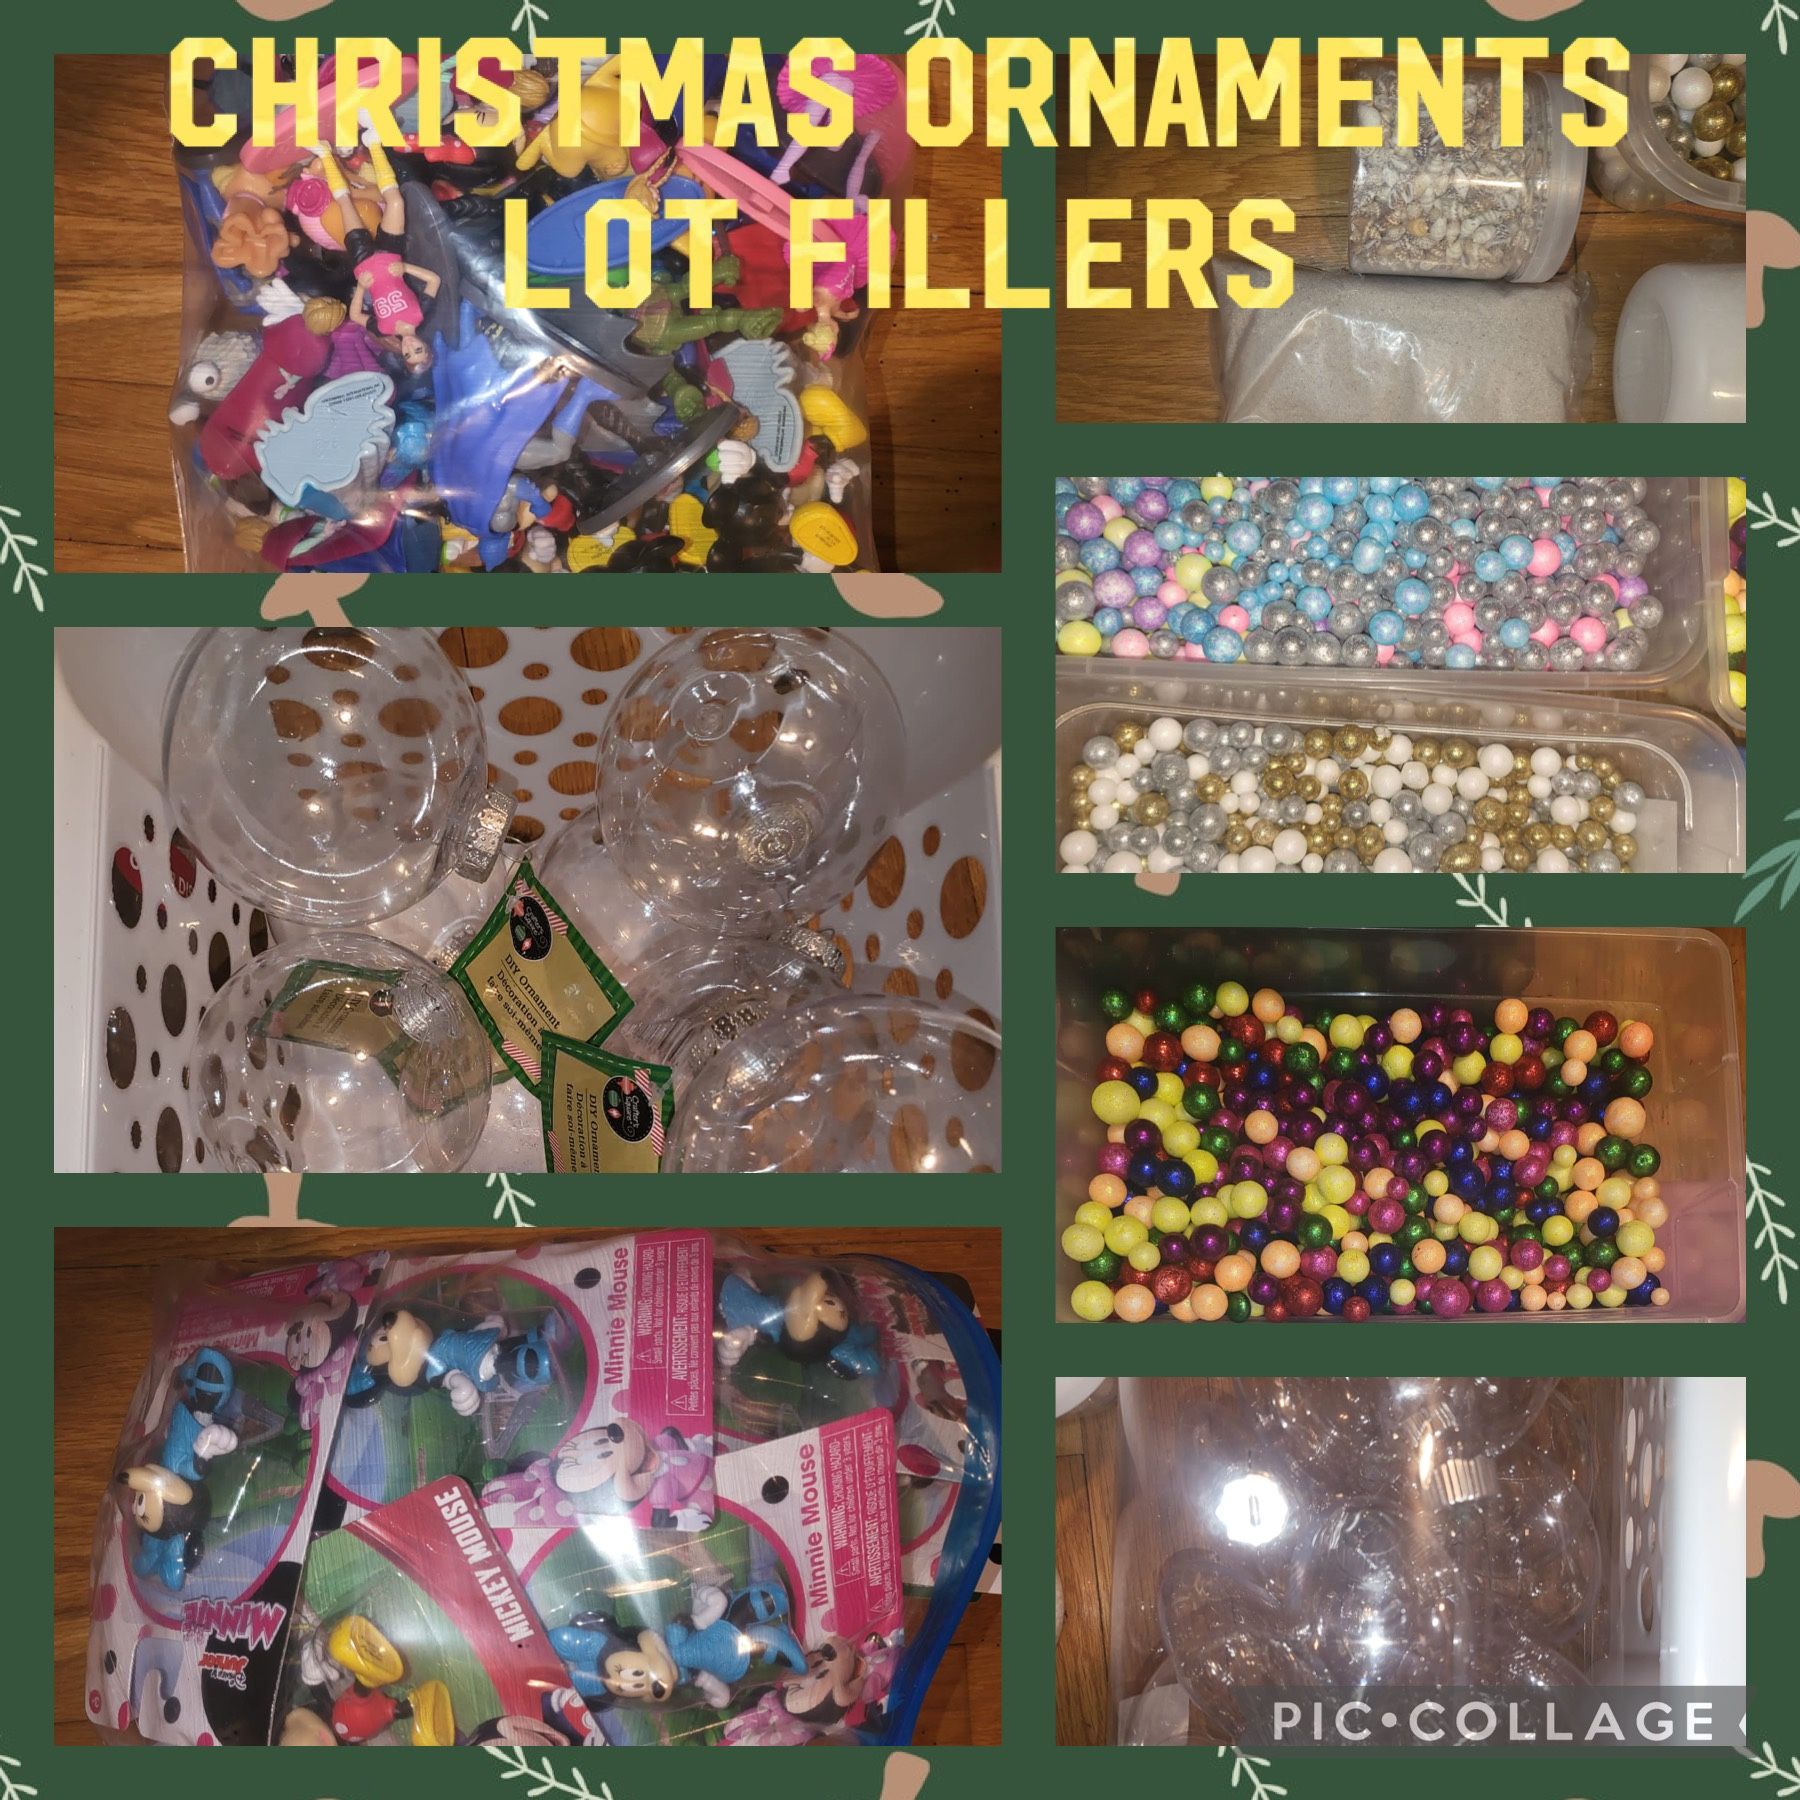 Ornaments Fillers for whole made Christmas ornaments example in photos